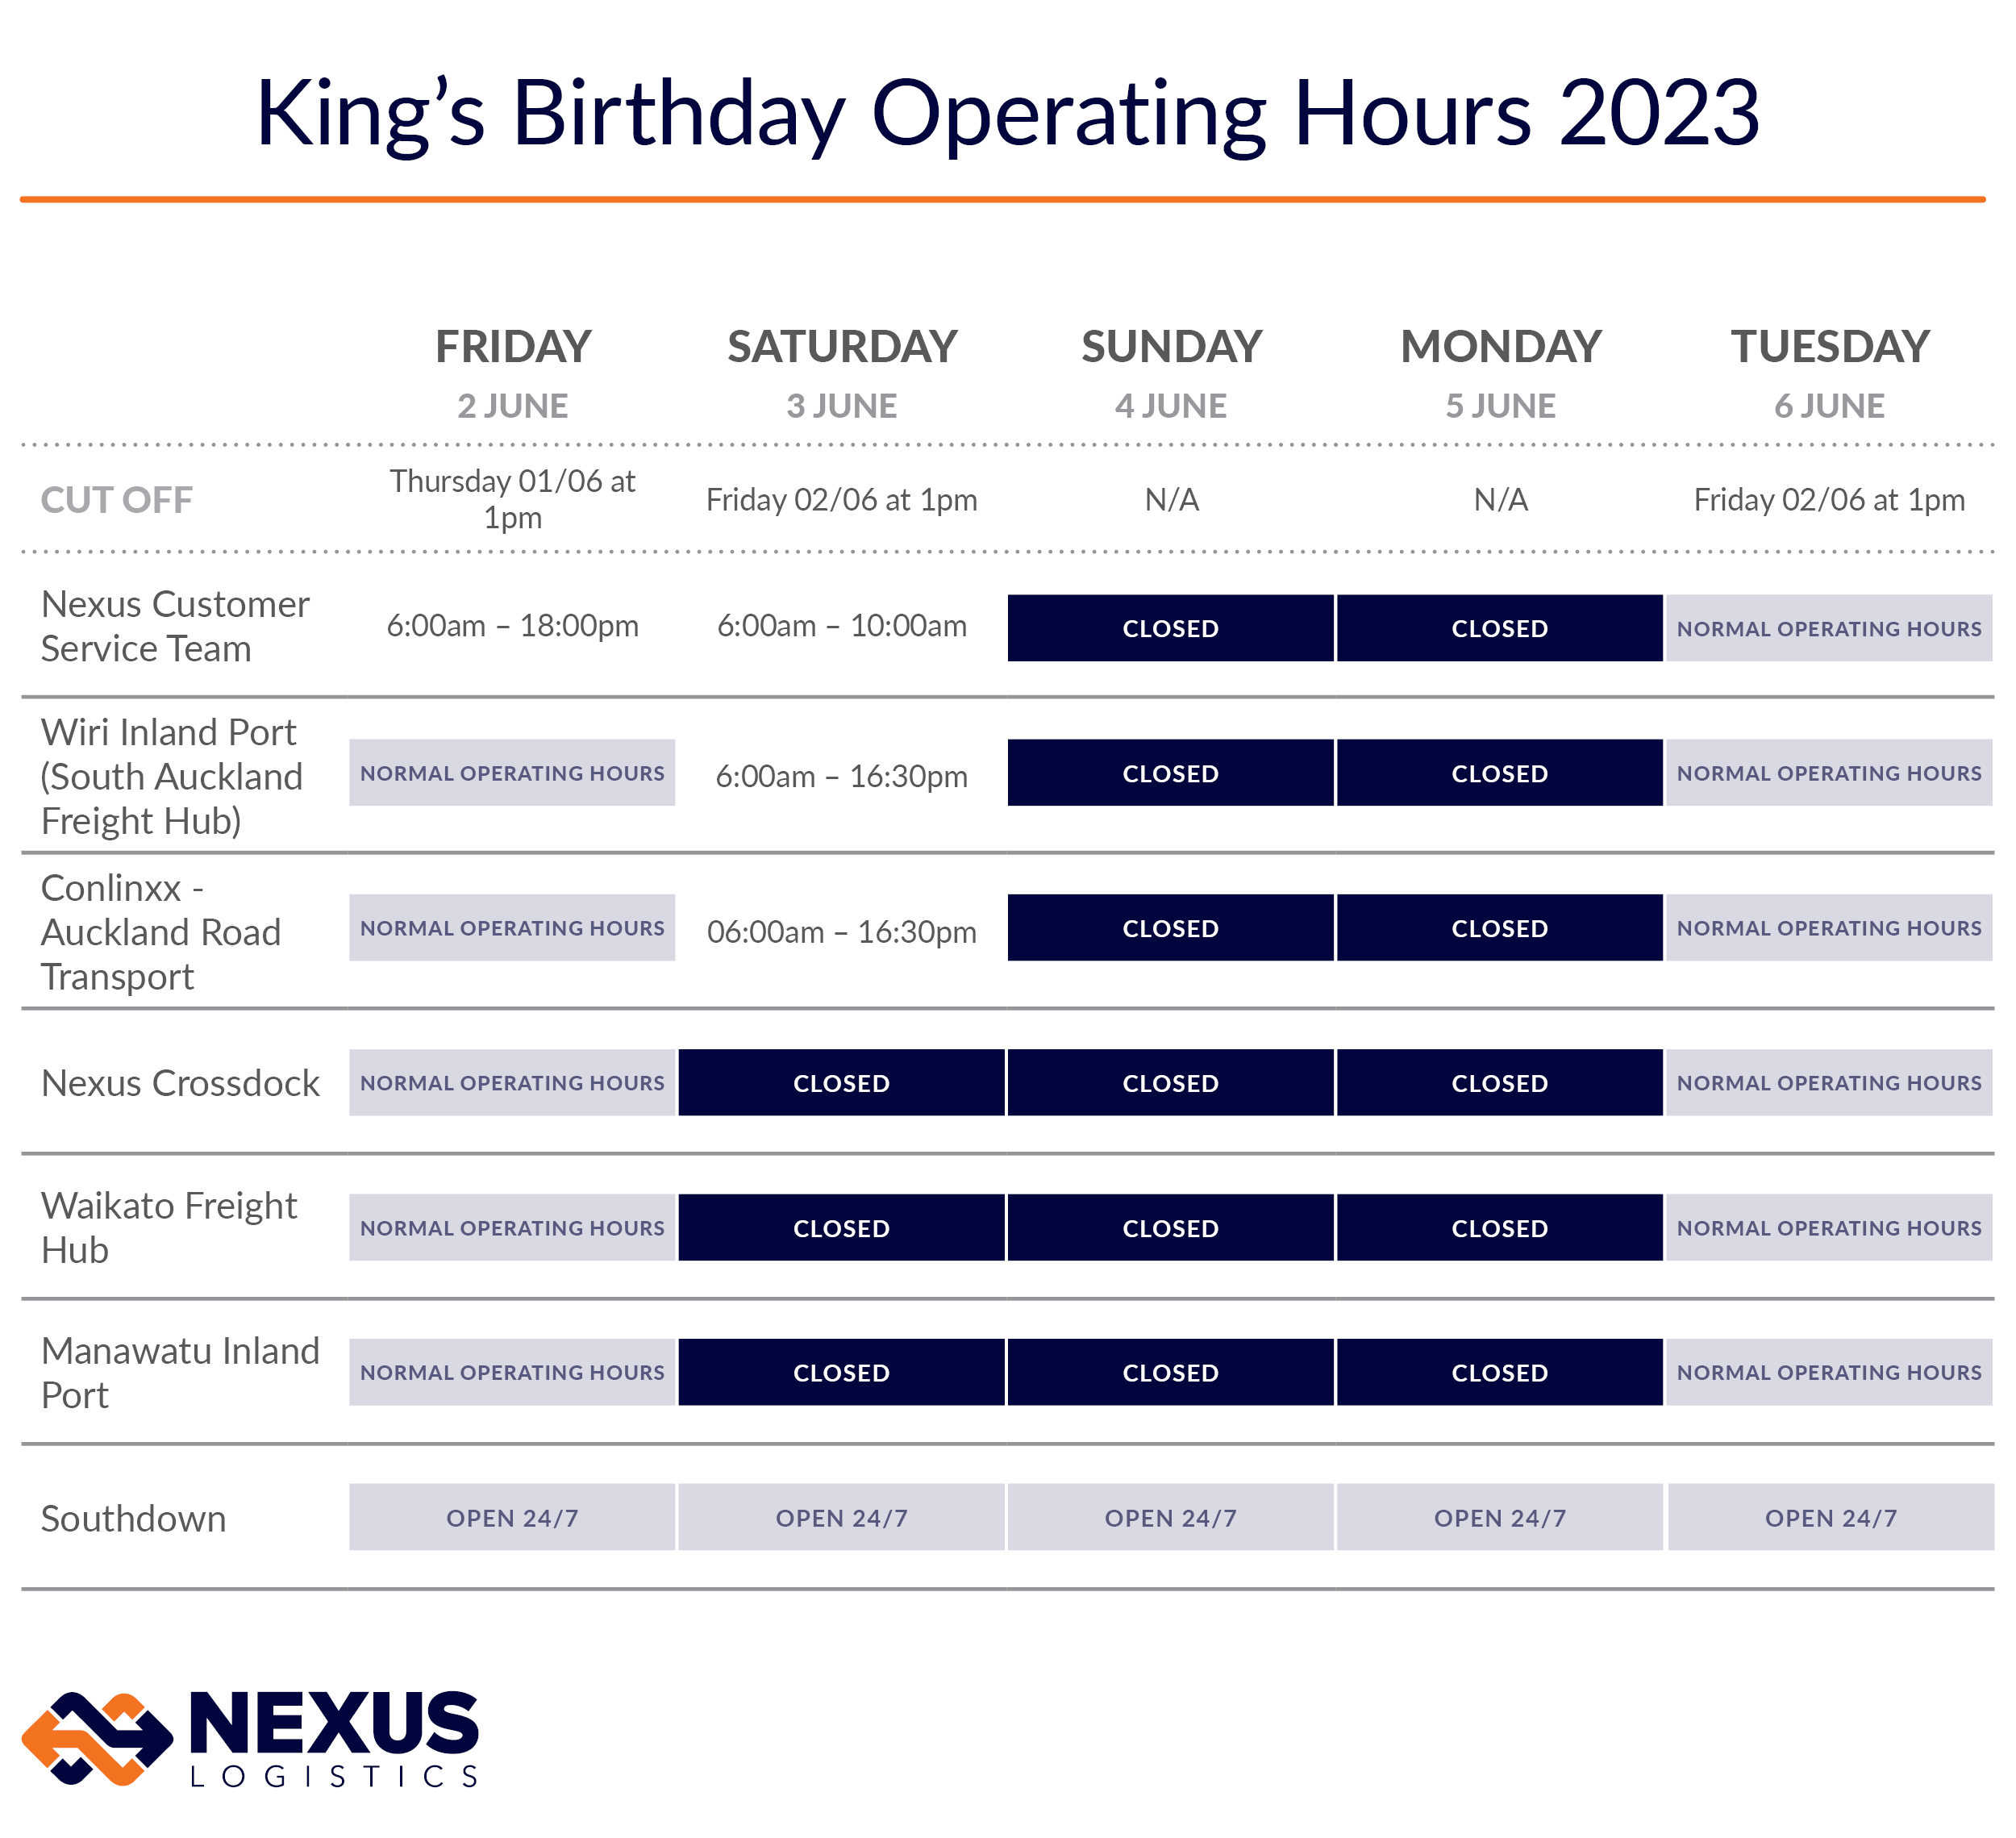 King's birthday operating hours 2023